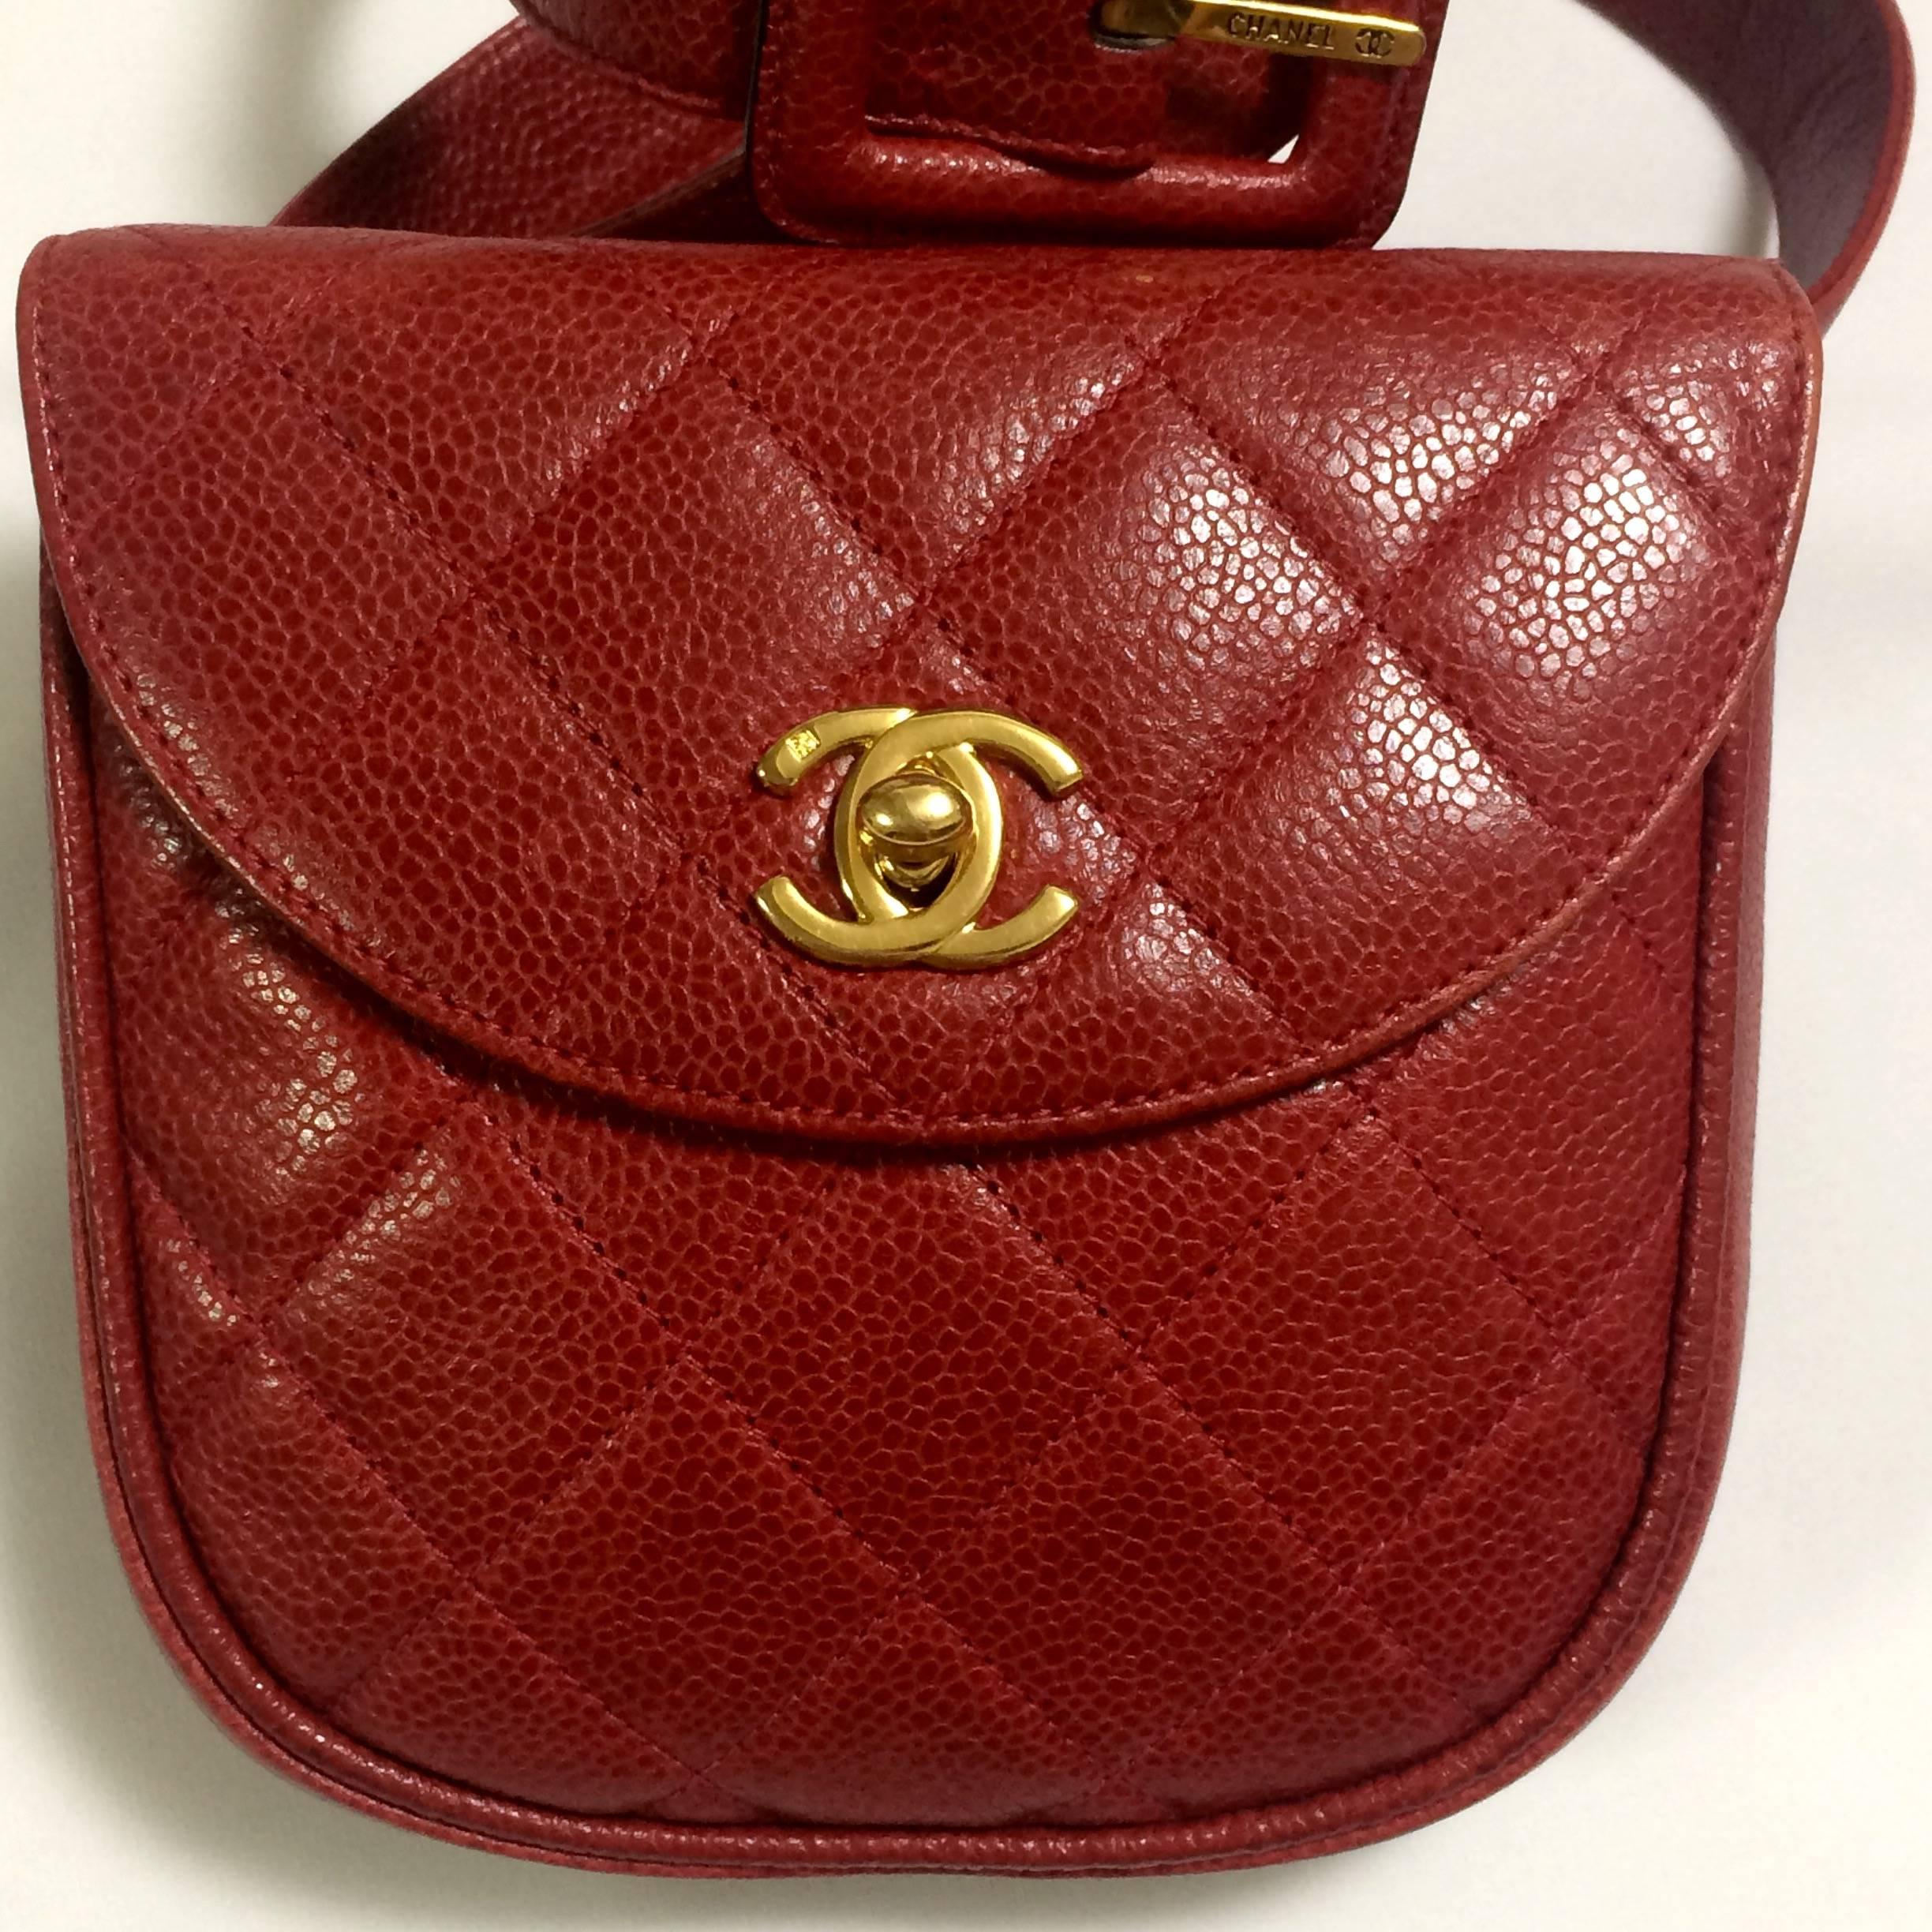 1990s. Vintage CHANEL oval shape 2.55 red caviar leather waist purse, hip bag, fanny pack with golden CC closure and a matching belt.

Classic bag but rare color. Must have piece for your collection! 

Introducing a vintage CHANEL red caviar leather